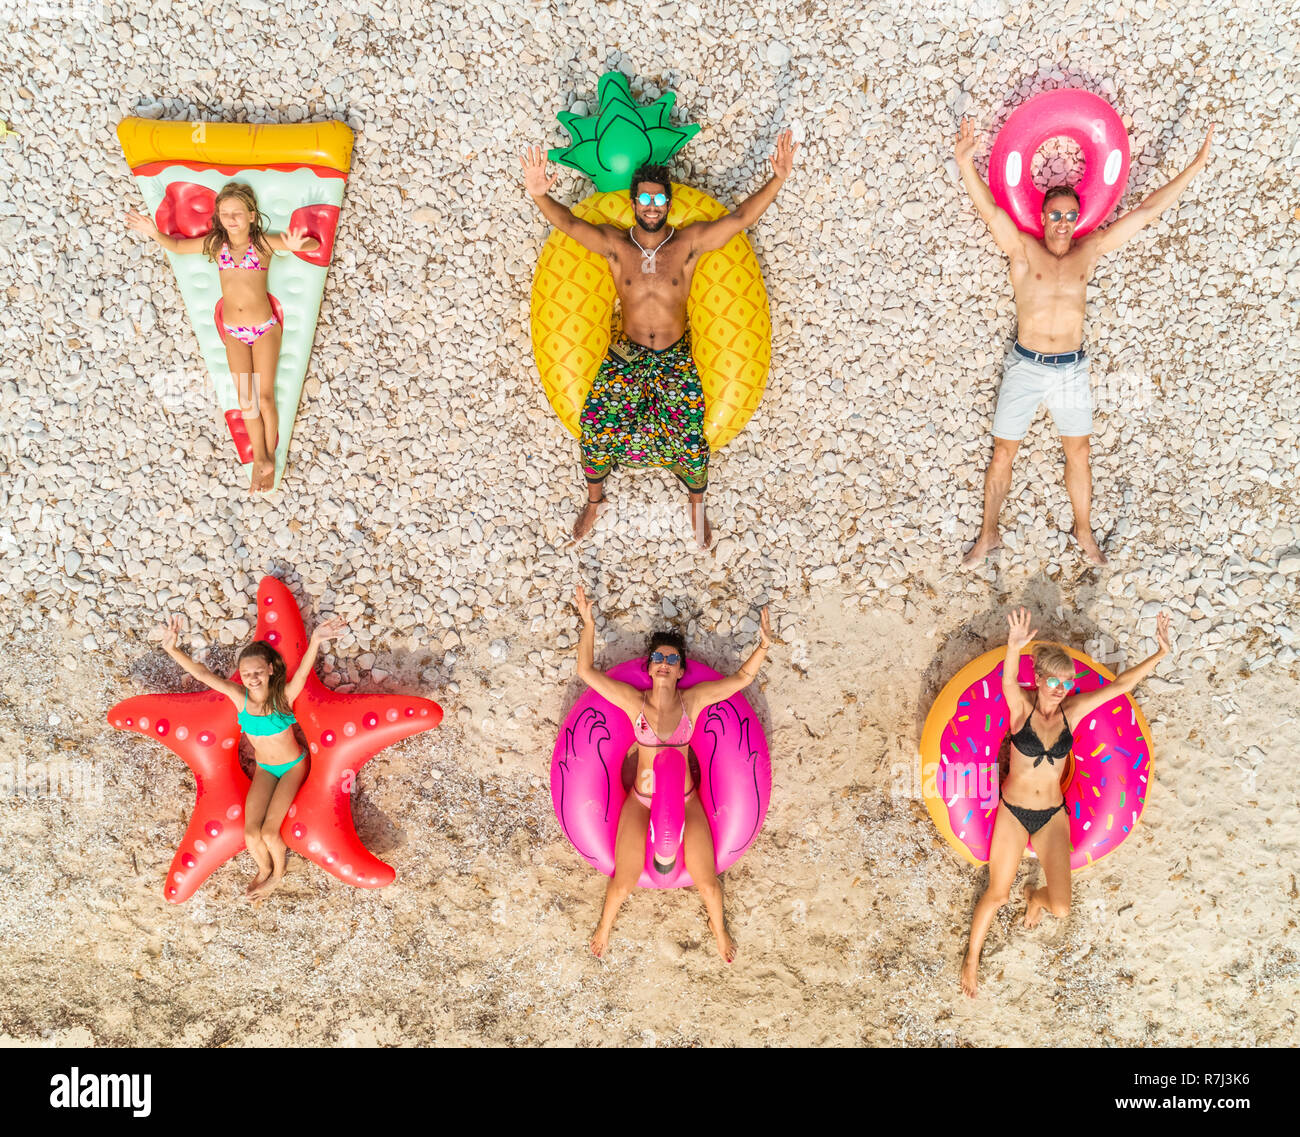 Aerial close up view of friends lying on big inflatable pineapple, pizza, star, donut, flamingo shaped mattresses on beach. Stock Photo